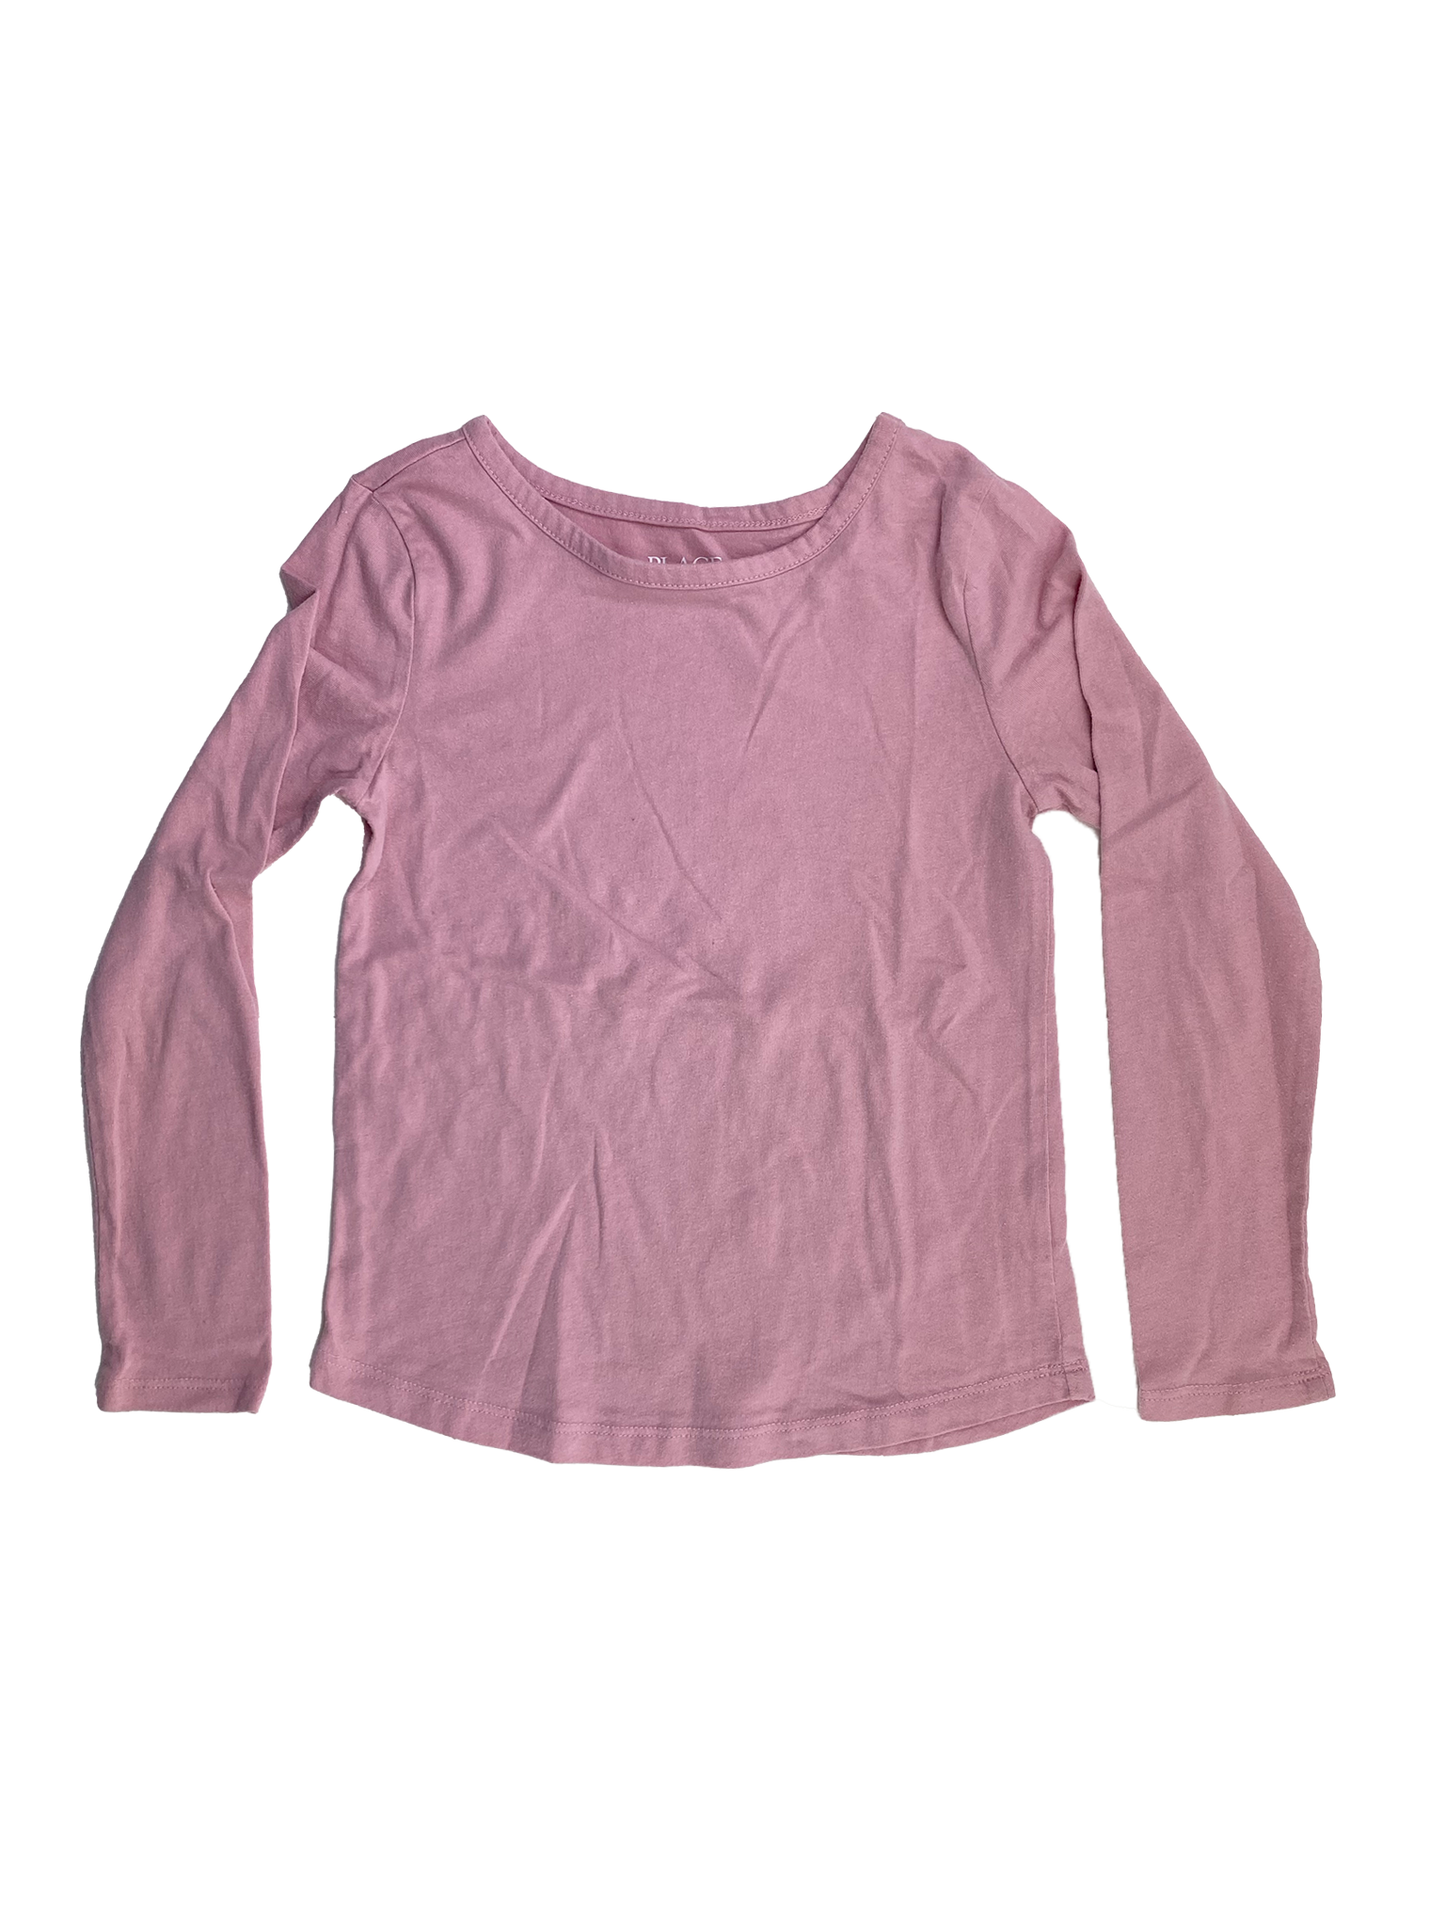 The Children's Place Pink Long Sleeve Shirt 5-6